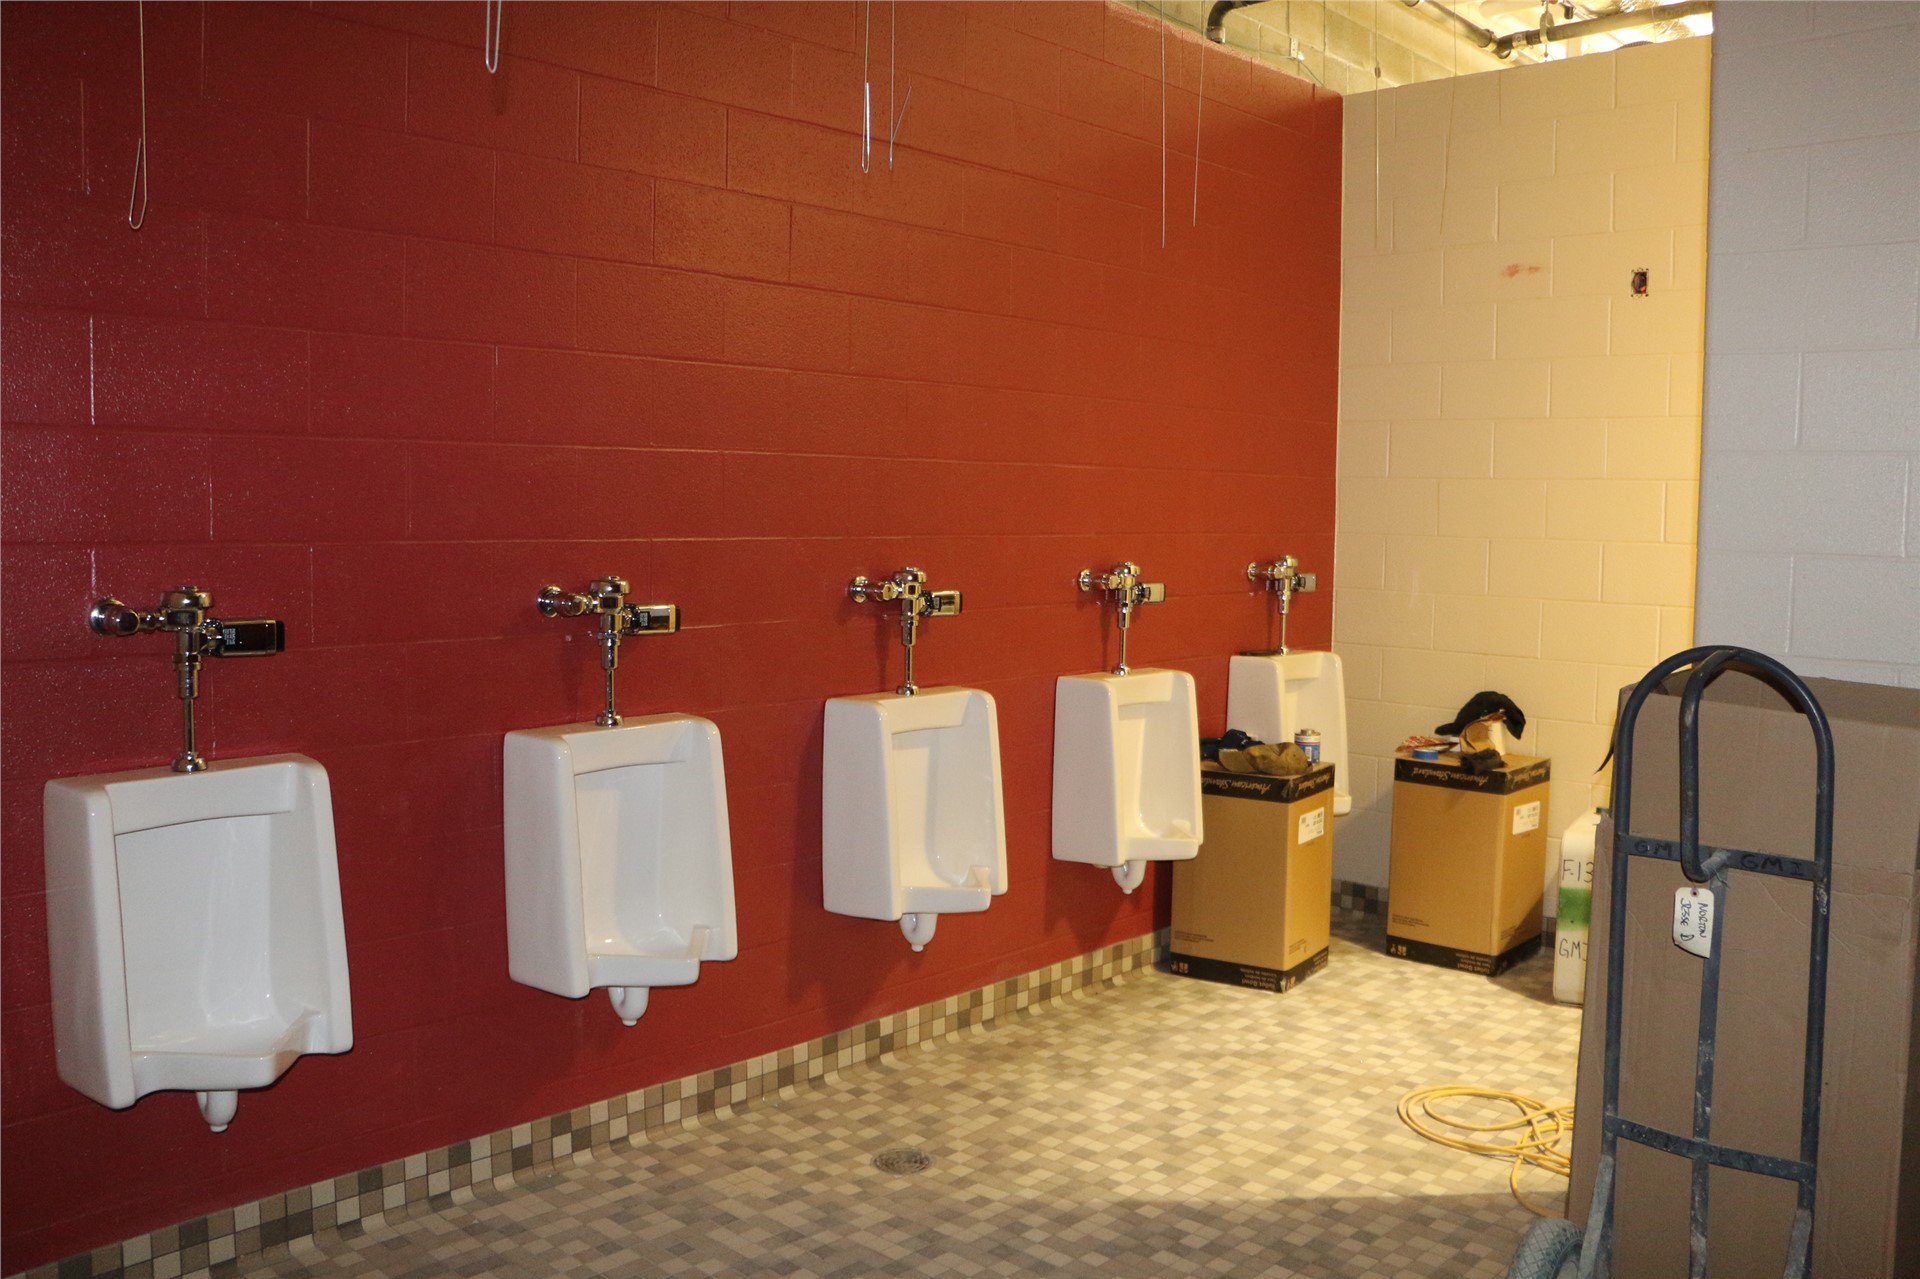 Men's Restroom in the Athletic Wing